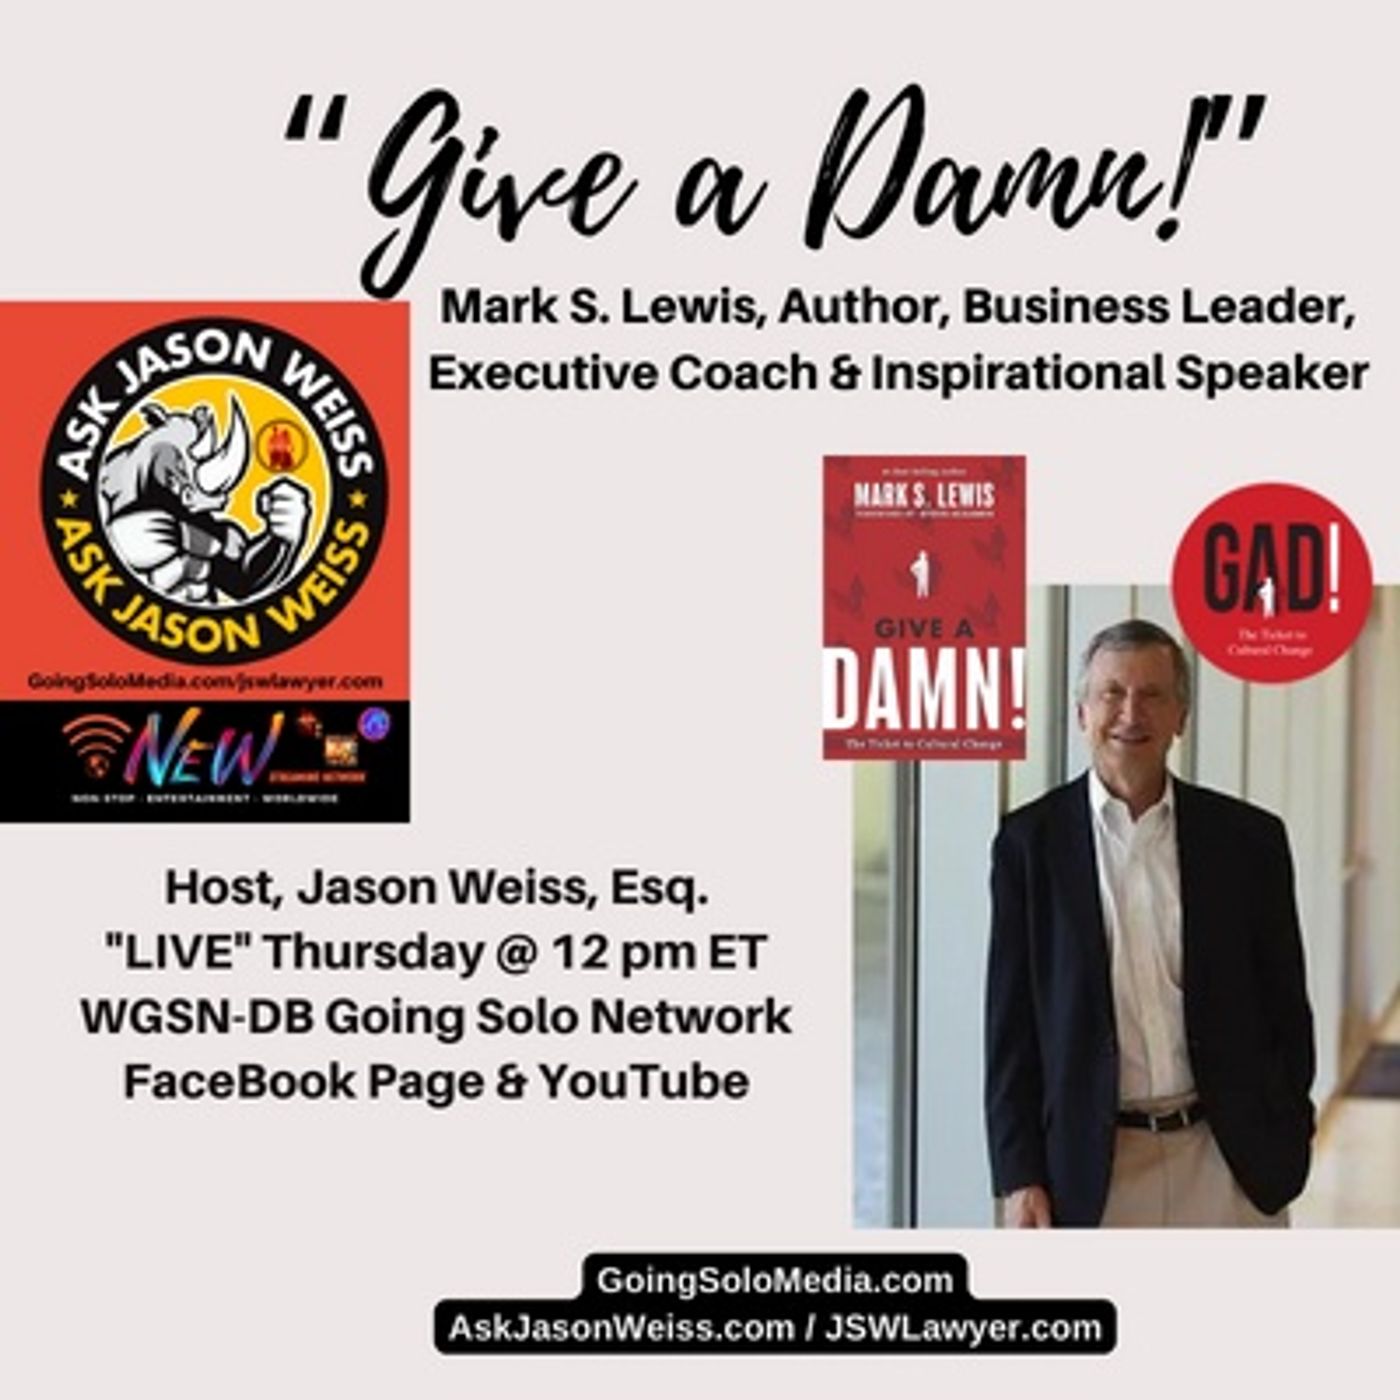 Give A Damn! with Mark S. Lewis Elite Guest & Author